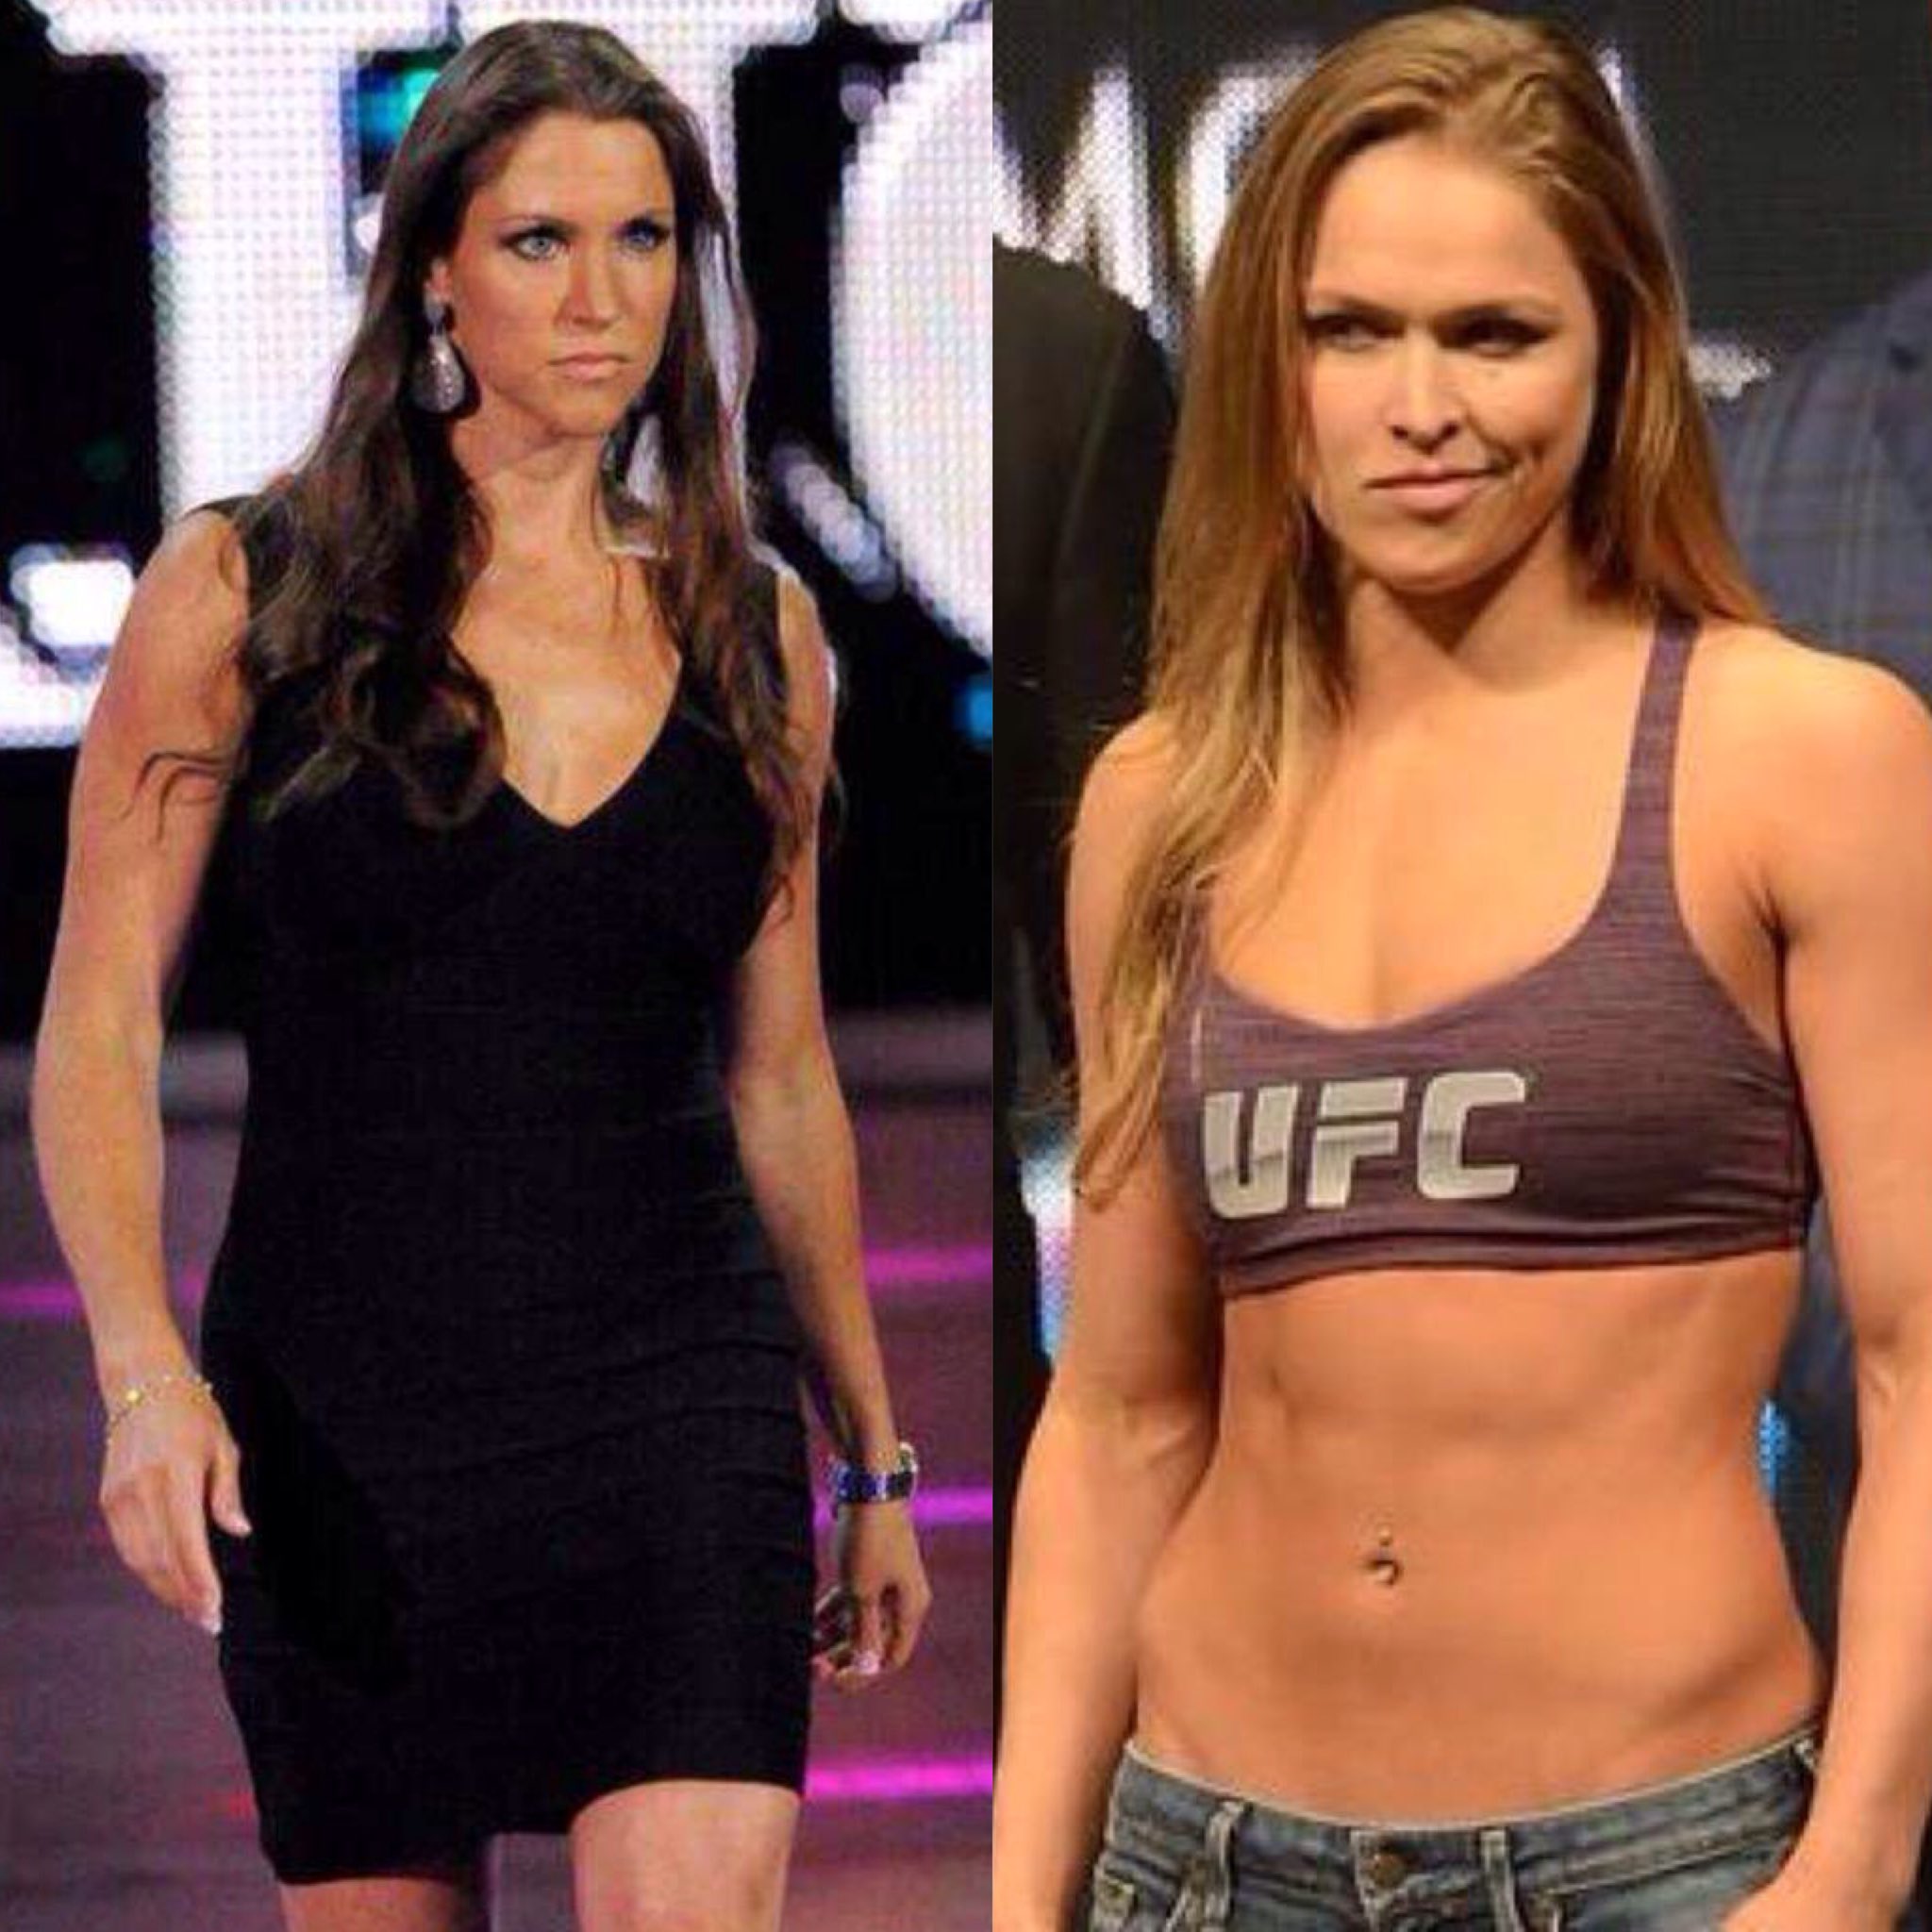 WWEPPorn™ on X: Who's hotter? RT for Stephanie McMahon Like for Ronda  Rousey #WWE #UFC #SDlive #MYC t.copPdnpFzM6w  X